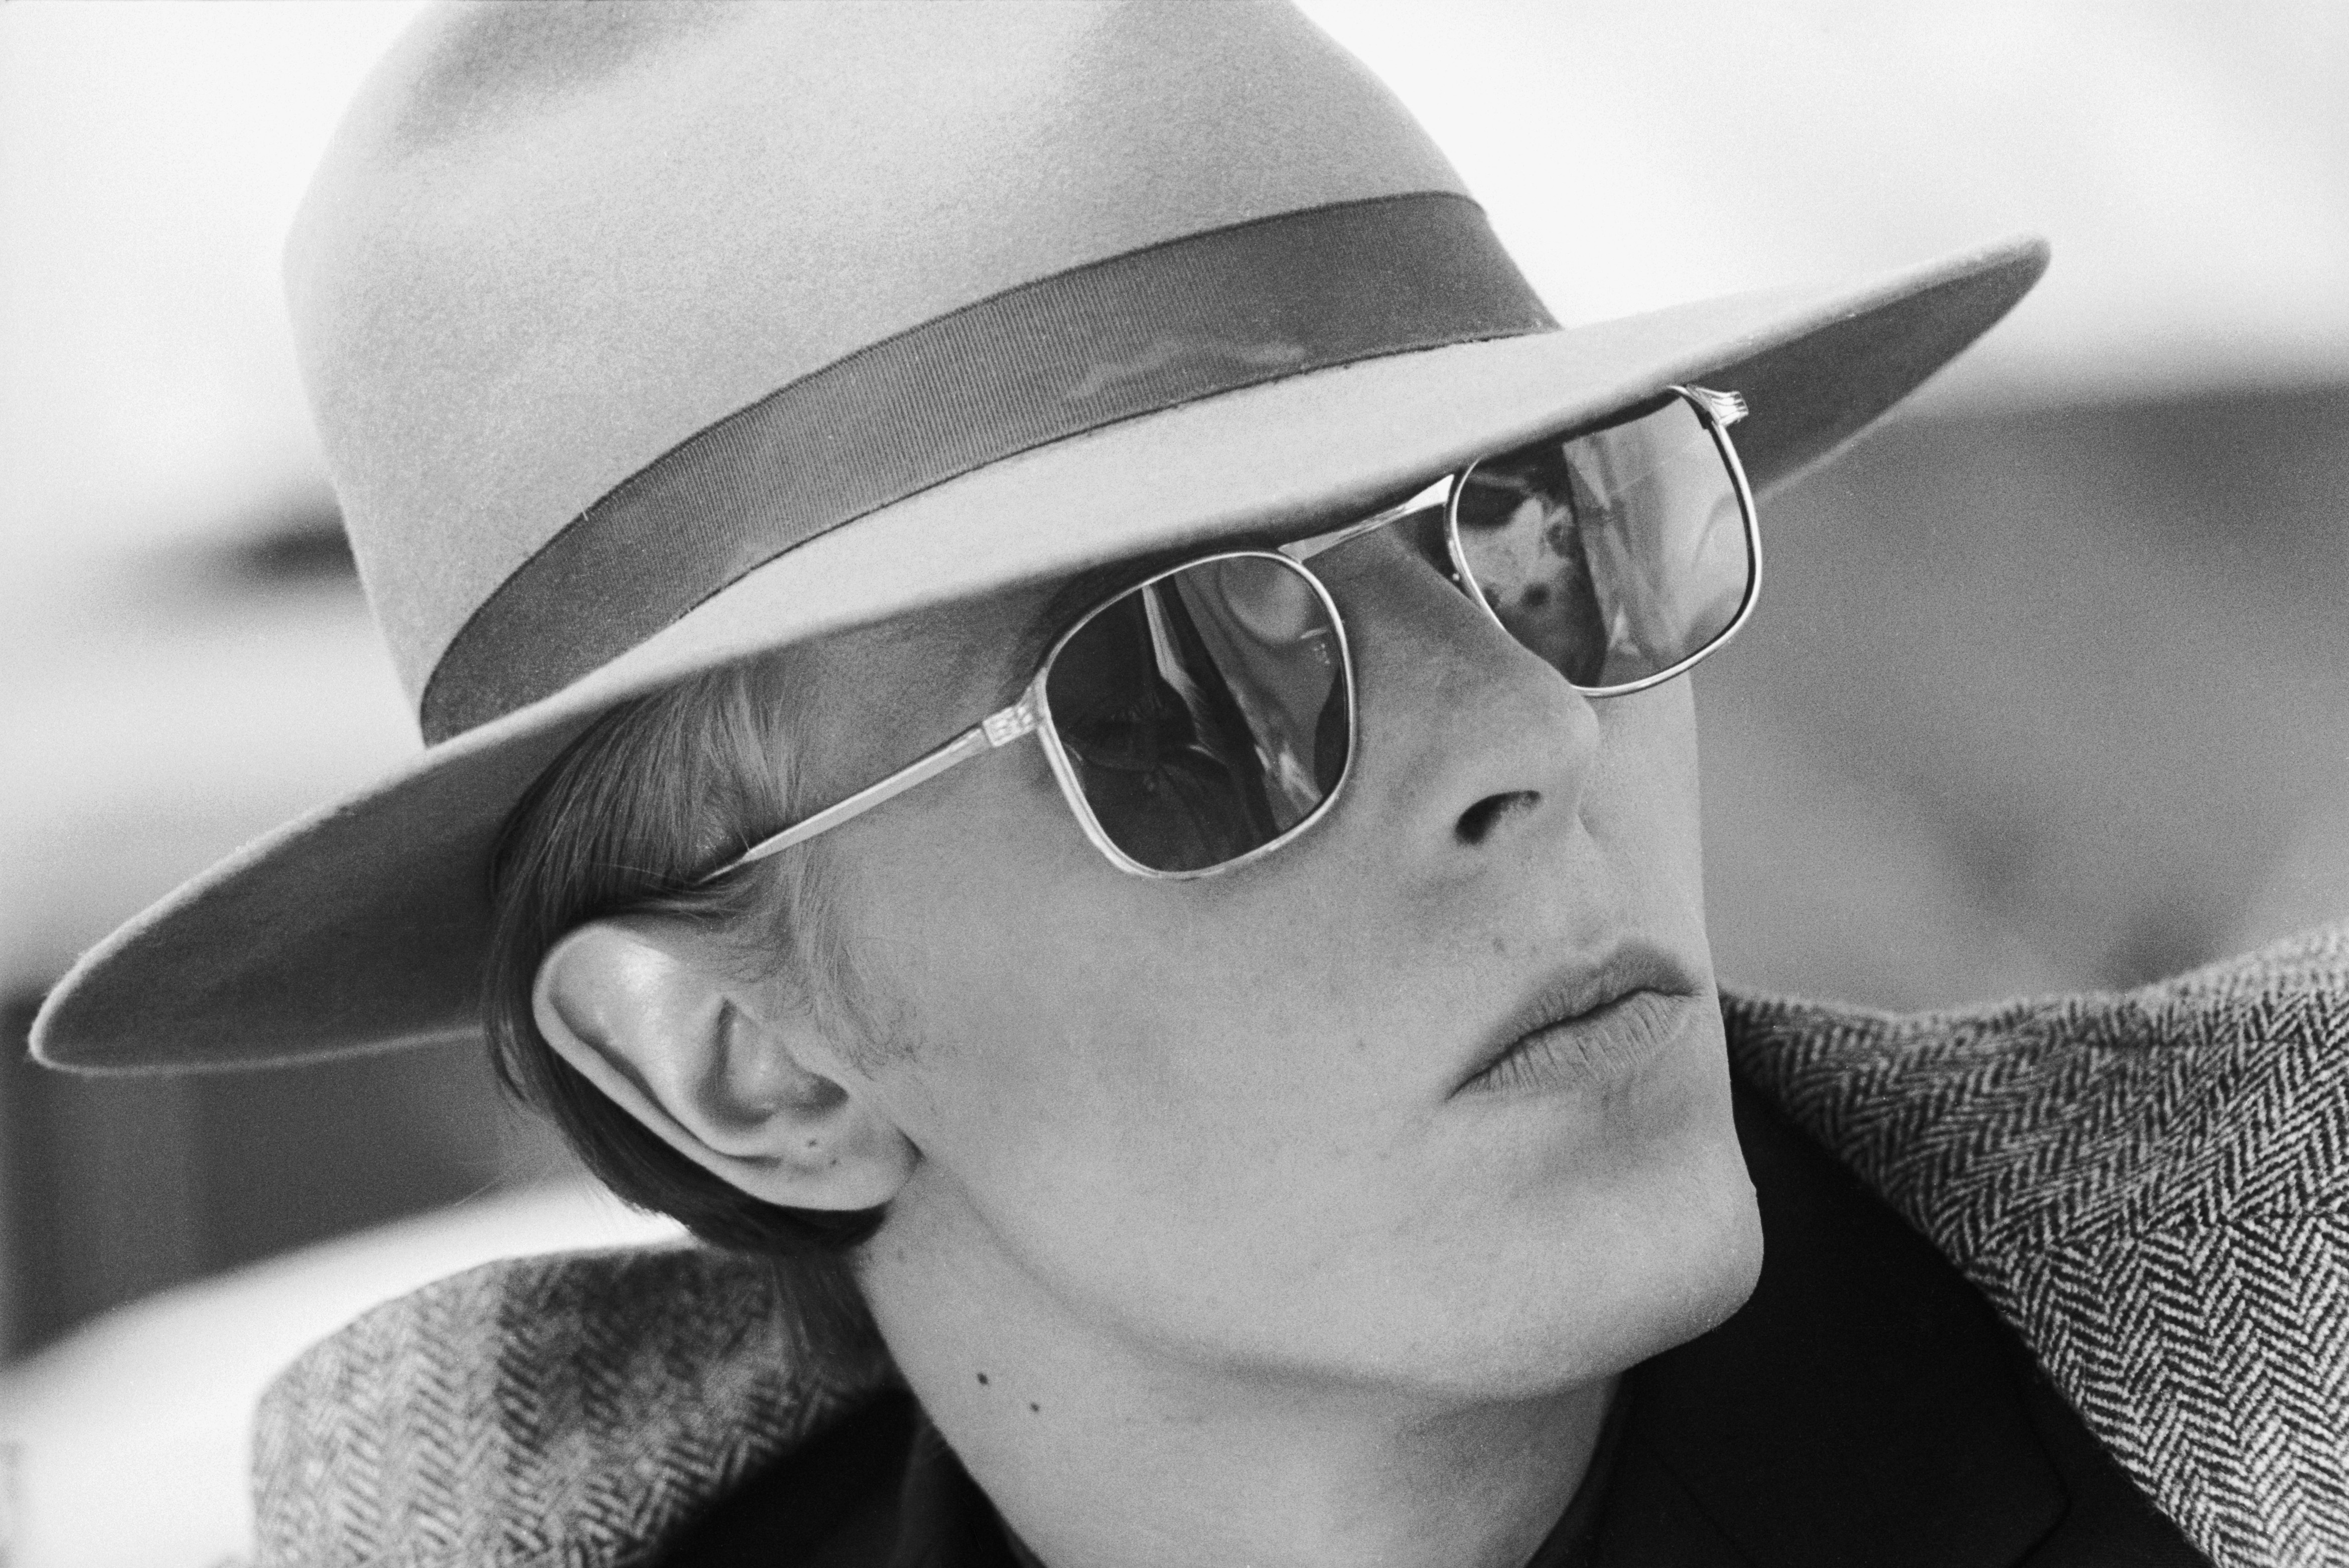 David Bowie during the filming of The Man Who Fell To Earth in Los Angeles in 1976.